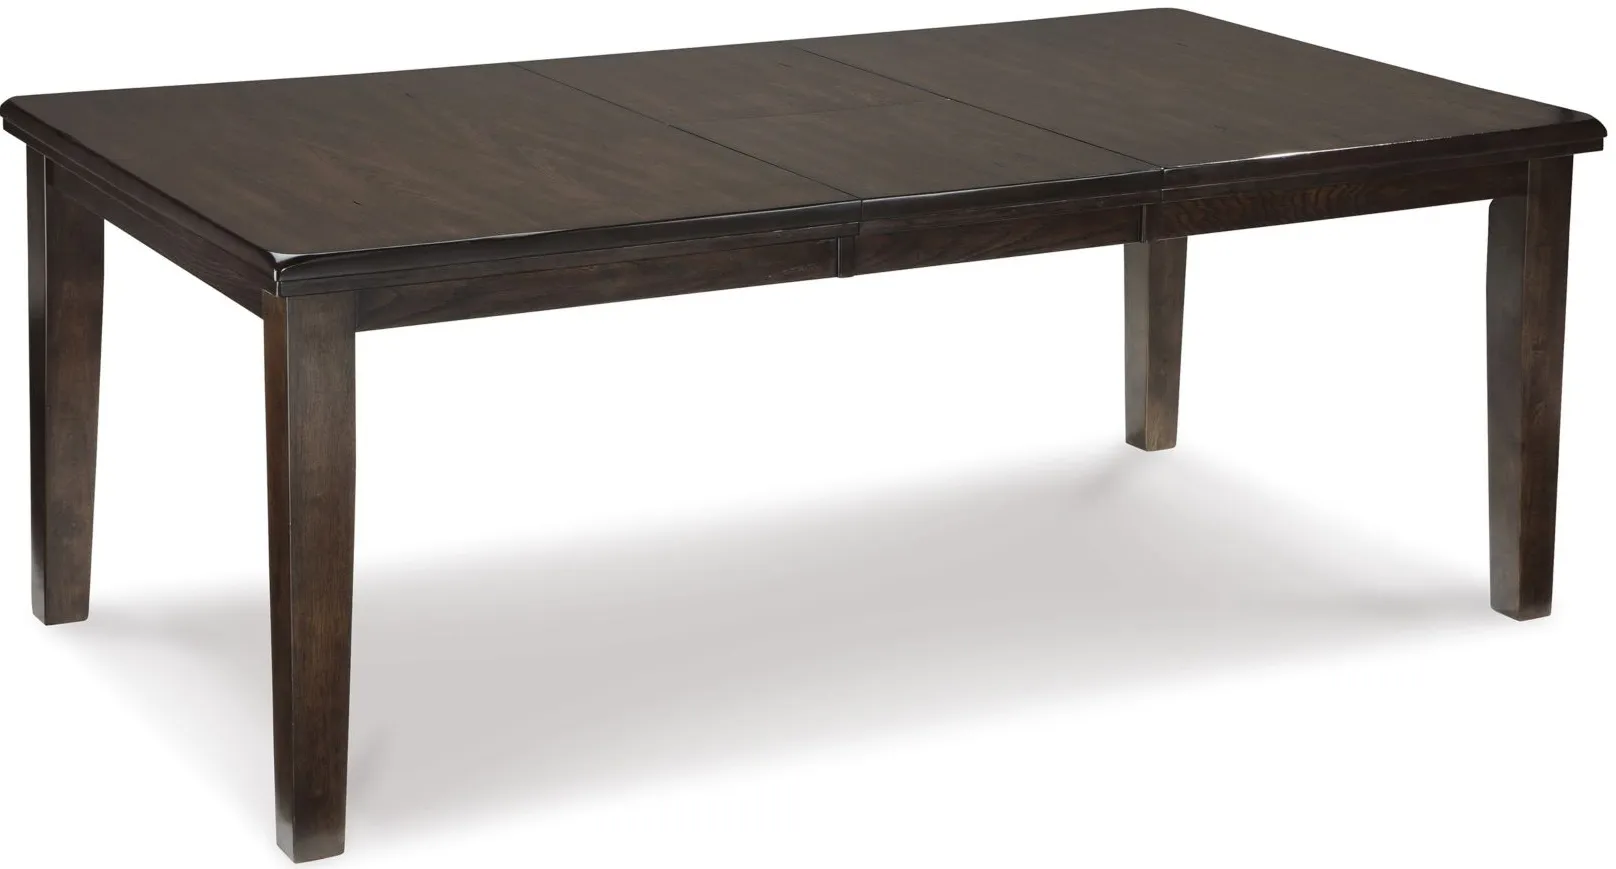 Haddigan Dining Extension Table in Dark Brown by Ashley Furniture